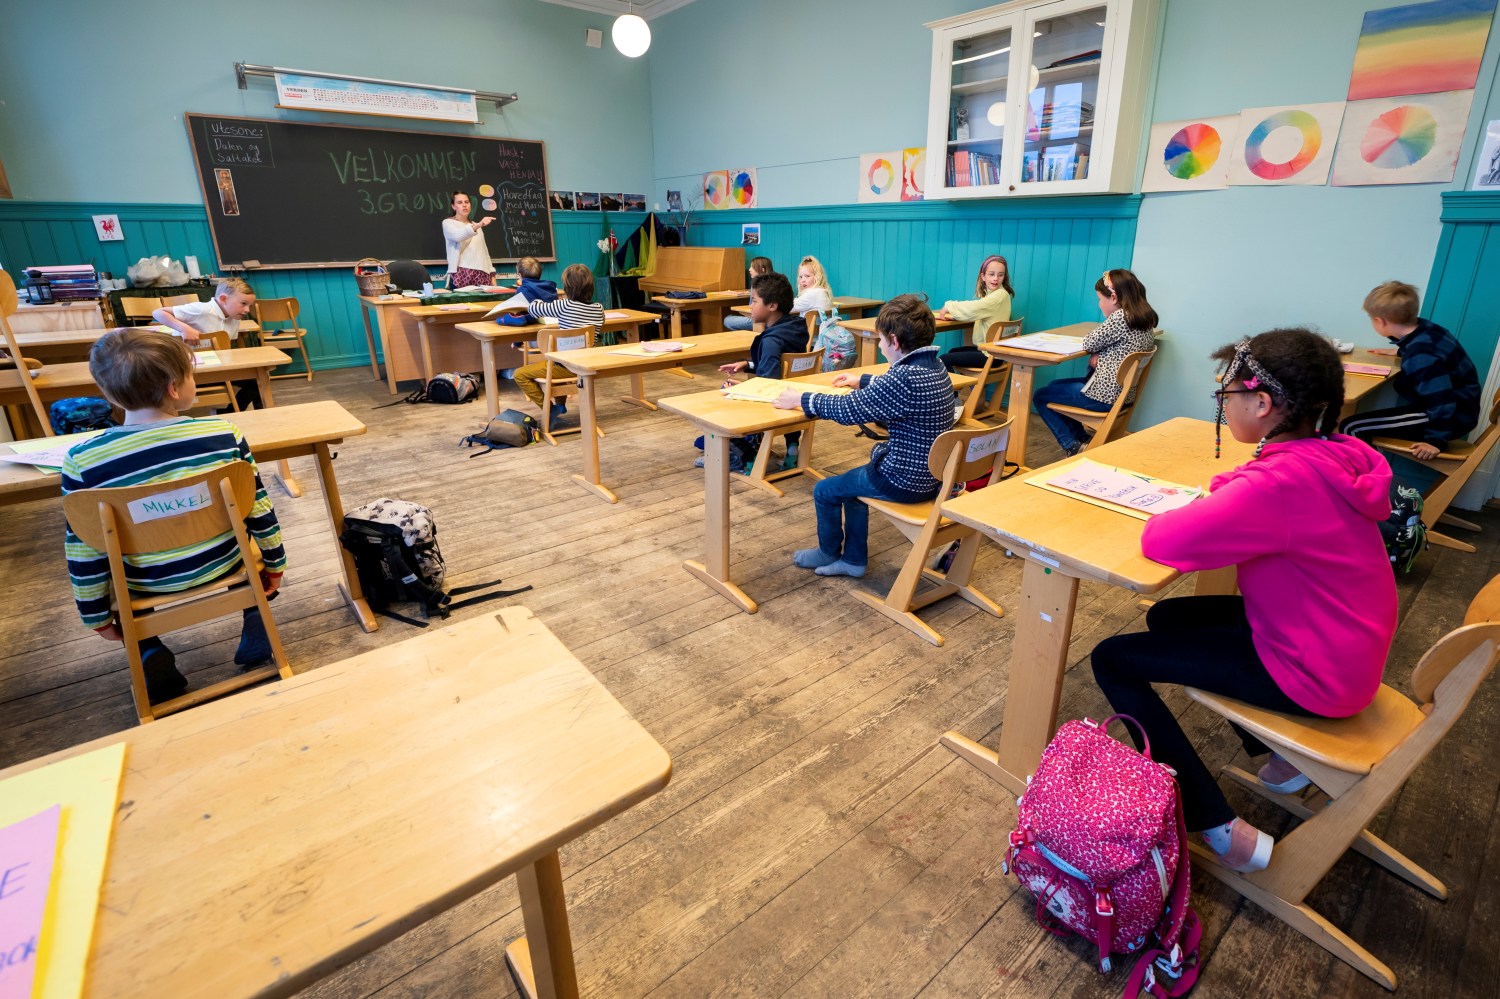 A teacher conducts the classes at Nordstrand Steinerskole, as the school reopened after few weeks, due to the coronavirus disease (COVID-19) outbreak, in Oslo, Norway April 27, 2020. NTB Scanpix/Heiko Junge via REUTERS   ATTENTION EDITORS - THIS IMAGE WAS PROVIDED BY A THIRD PARTY. NORWAY OUT. NO COMMERCIAL OR EDITORIAL SALES IN NORWAY.